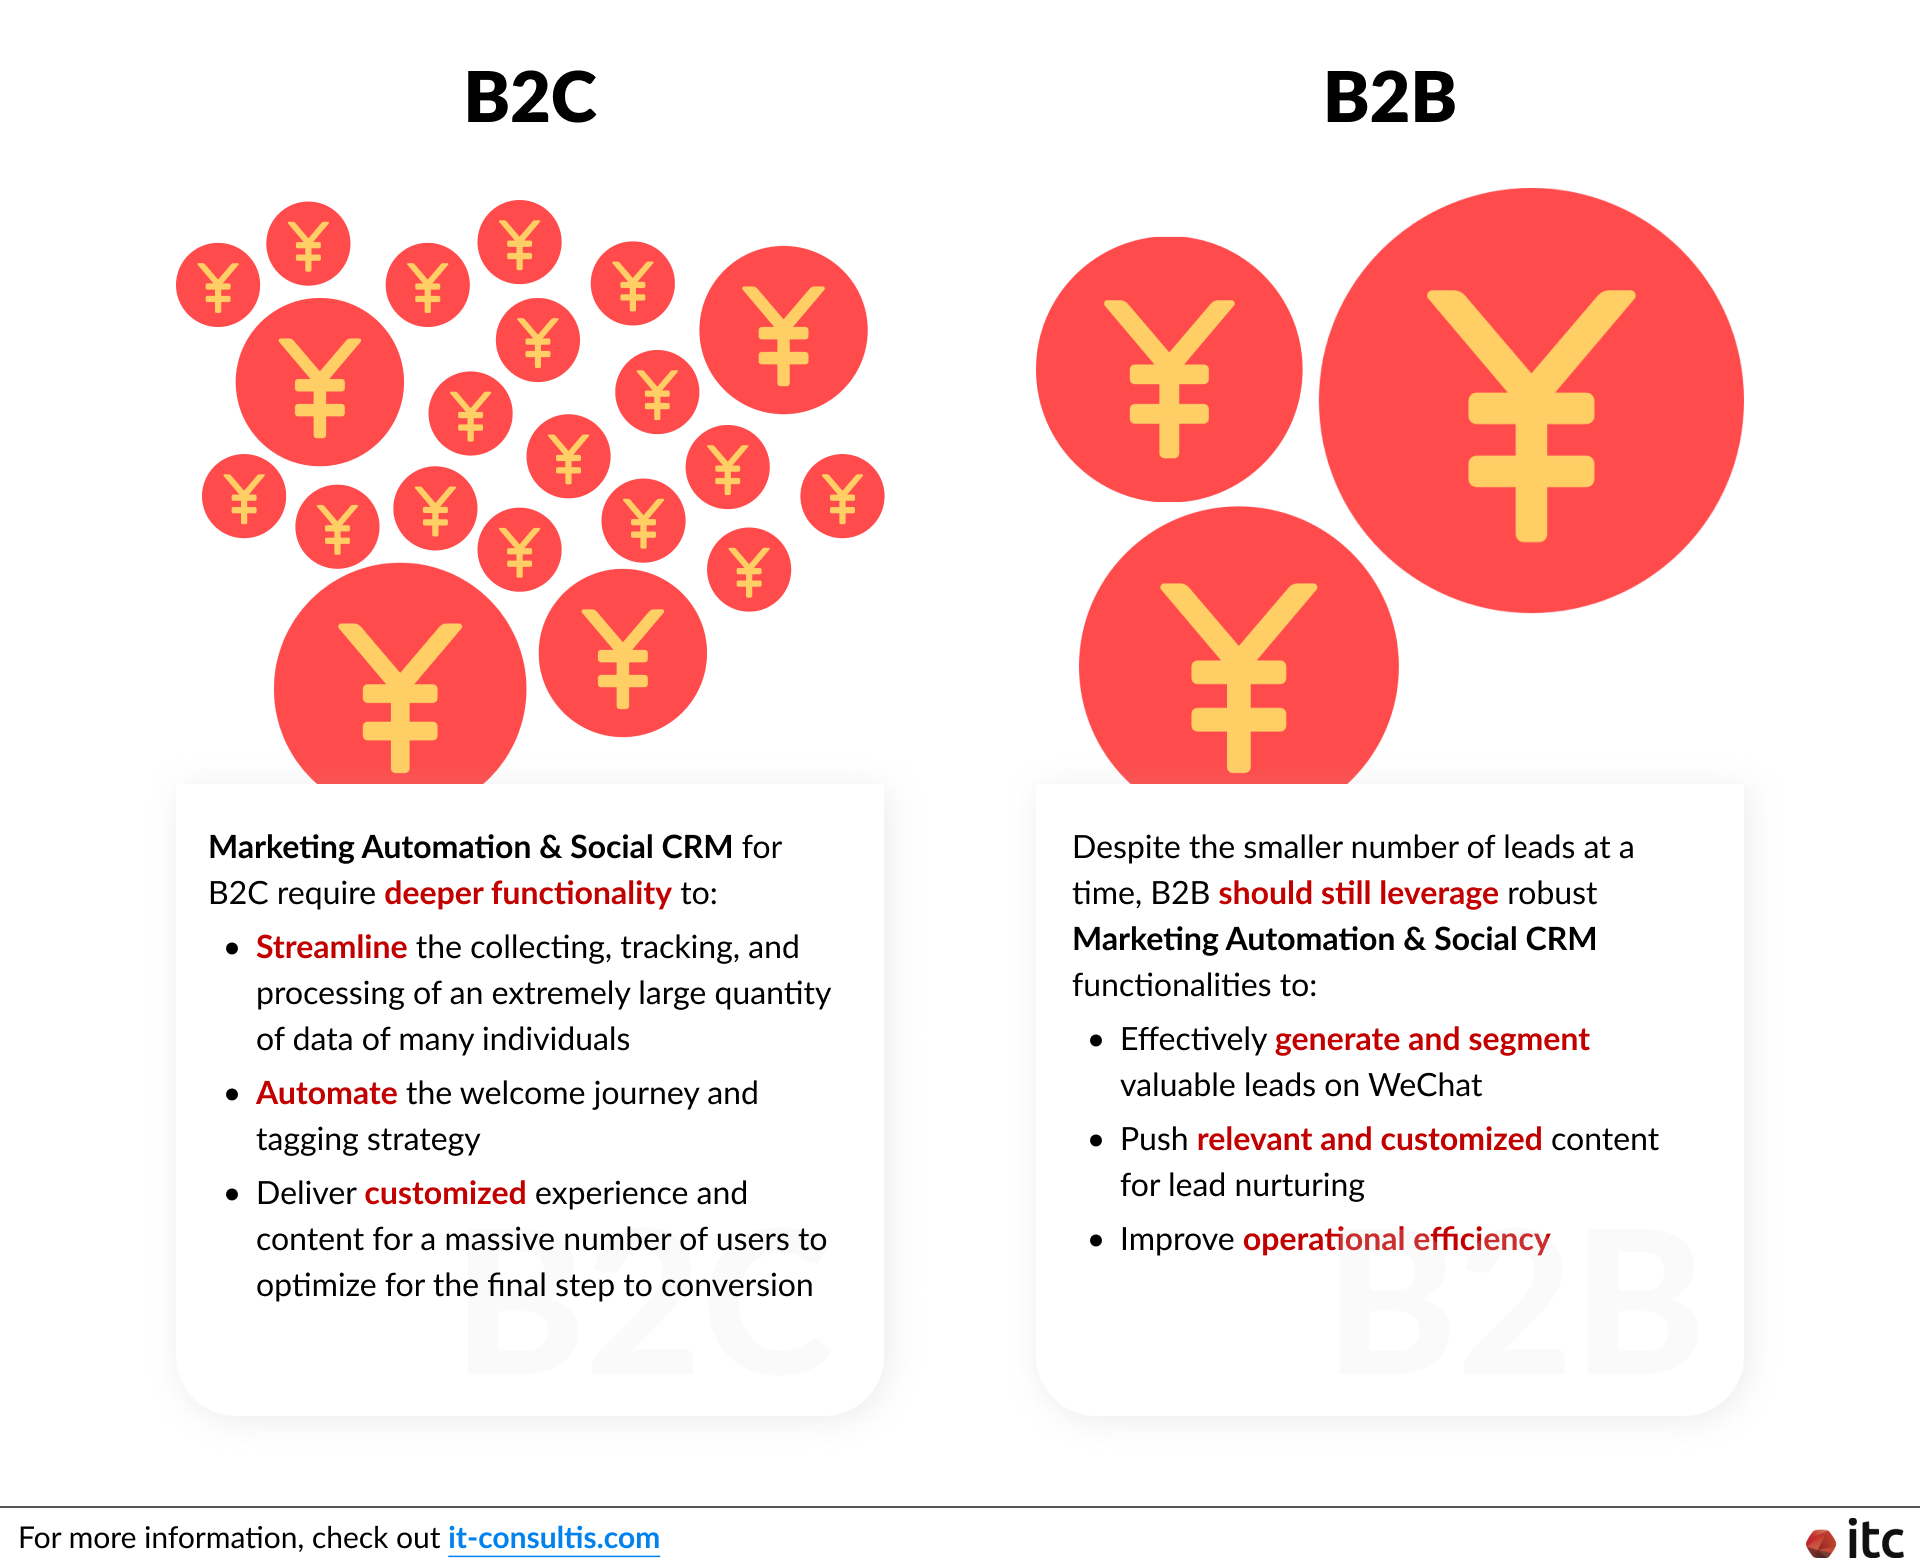 The differences in the number of leads to manage at a time make social CRM for B2B vs B2C in China very different, as social CRM tools for B2C generally require more robust functionalities to handle the extremely large amount of data